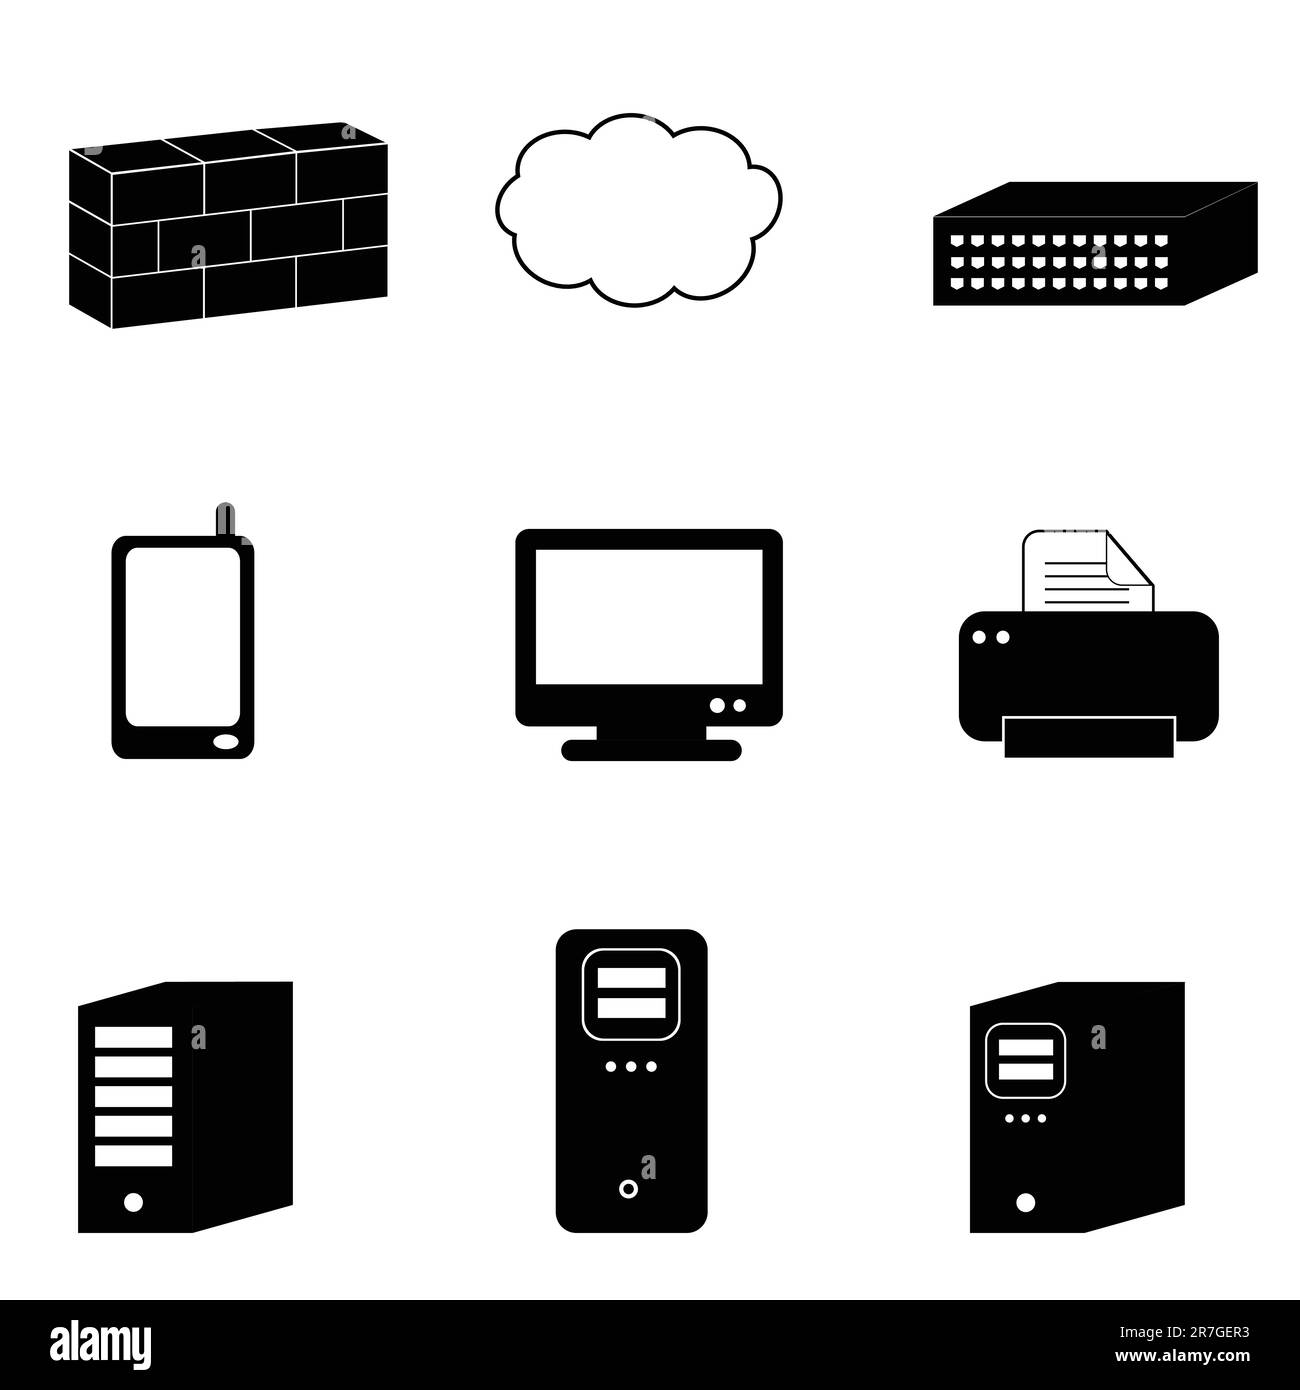 Computer and network icons in black Stock Vector